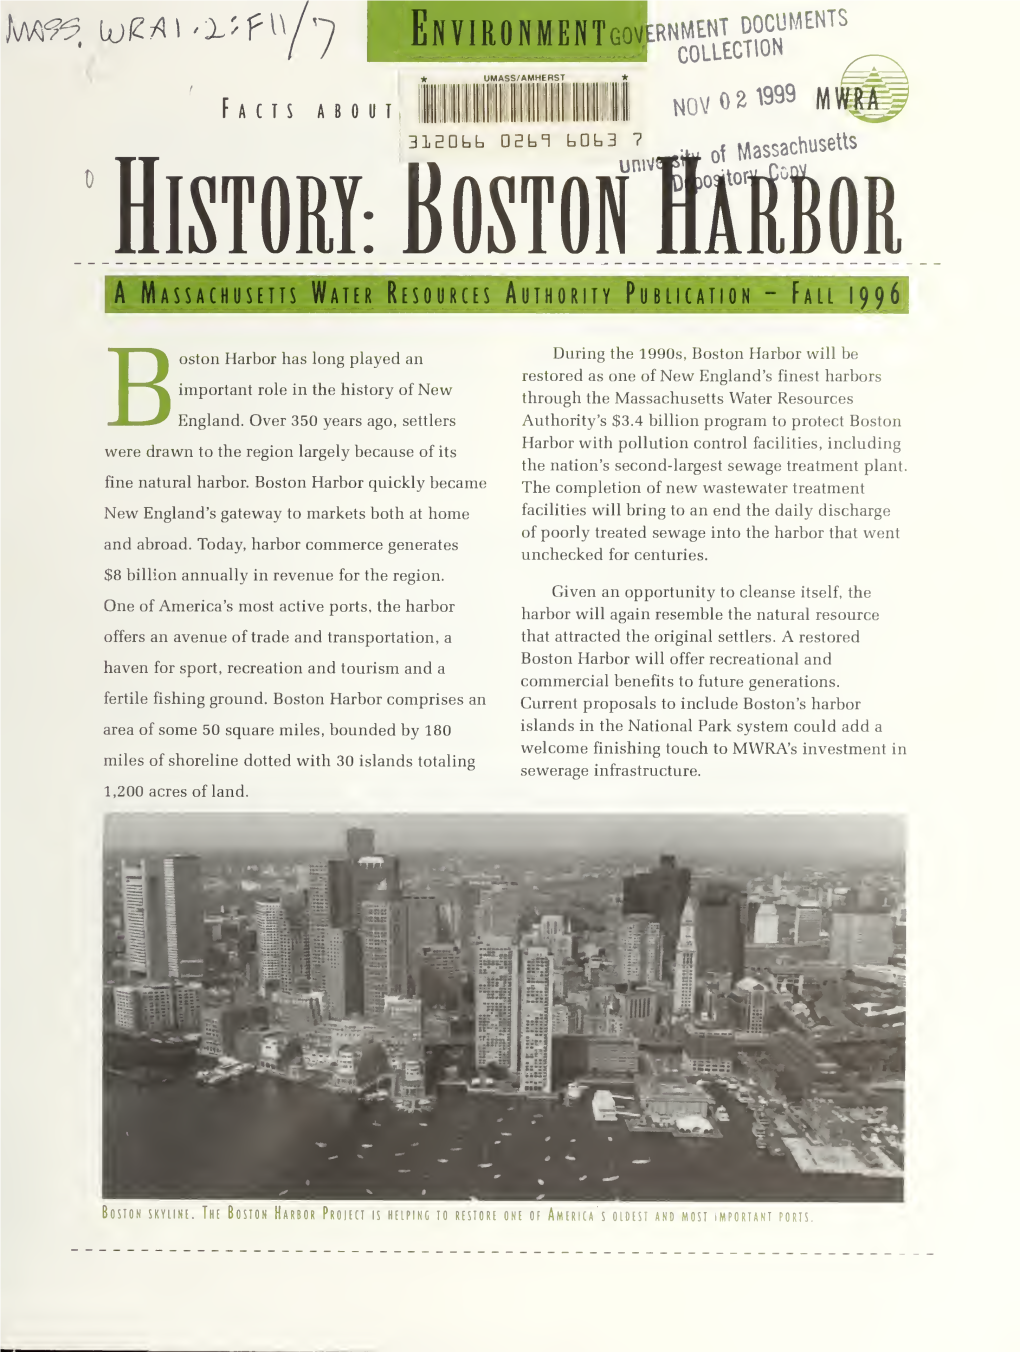 Facts About History : Boston Harbor